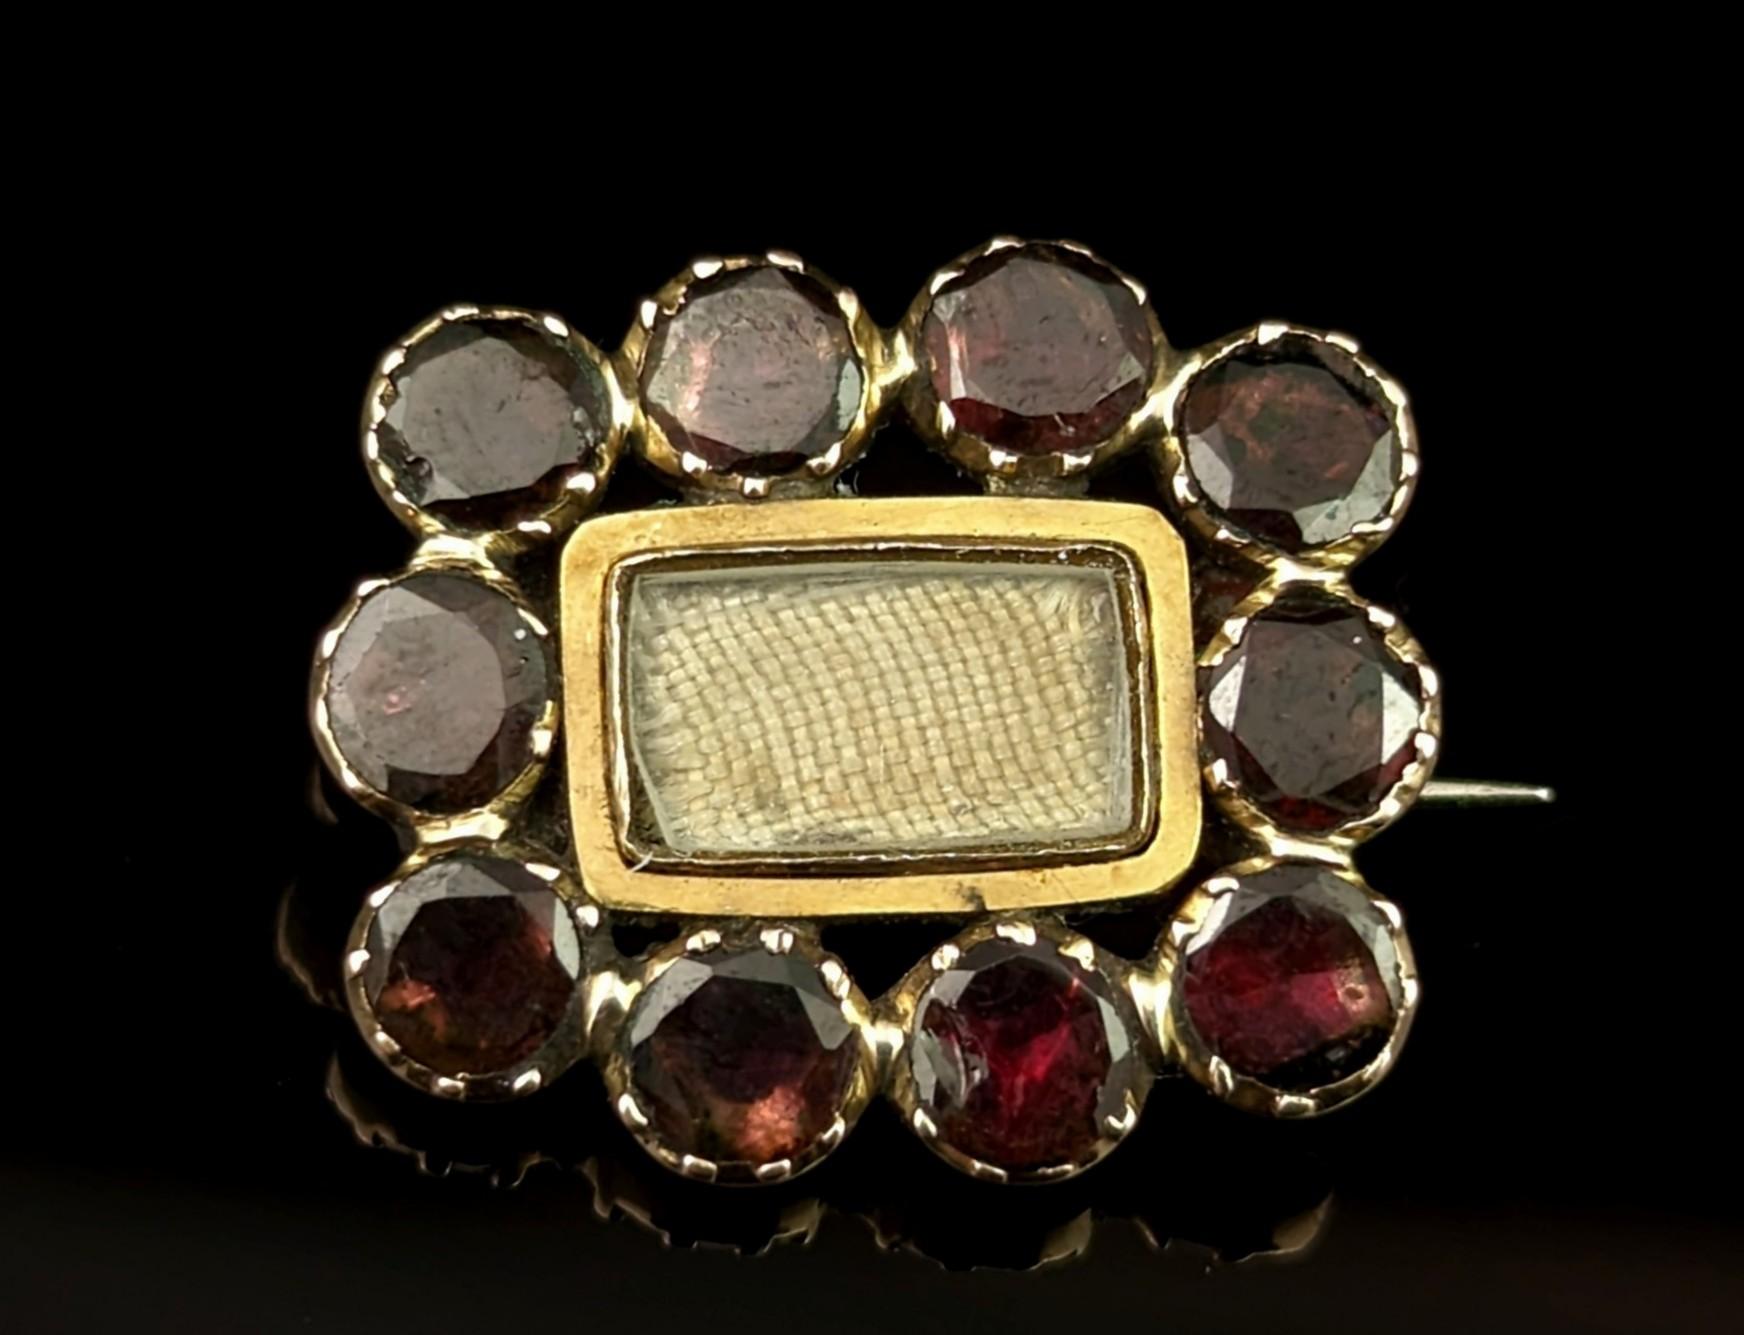 The Victorians were well known for their sentiment and it shows, not least in their beautiful Mourning pieces.

This sweet antique Mourning brooch or lace pin is a typical design of the Georgian era that remained popular throughout the 19th